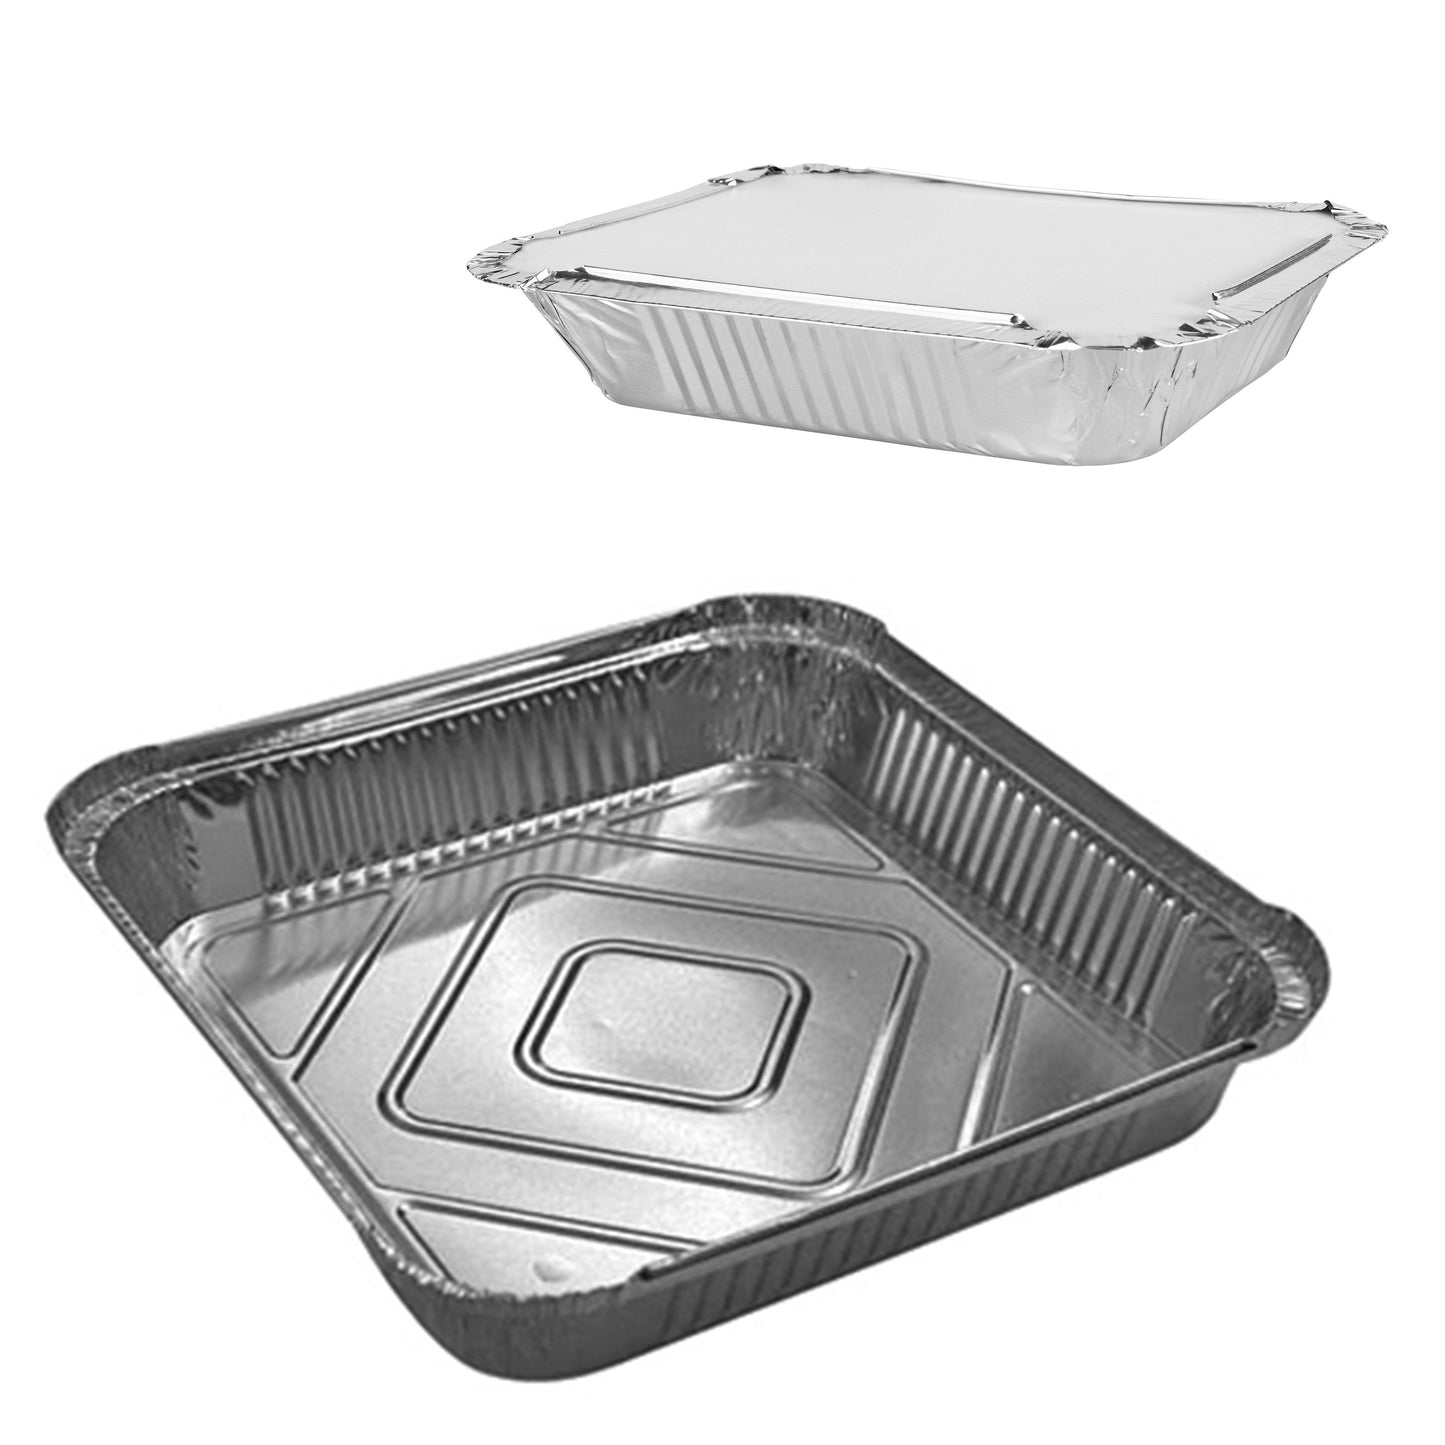 Aluminium Foil Food Roasting Tray with Lids Pack of 2 0866 A (Parcel Rate)